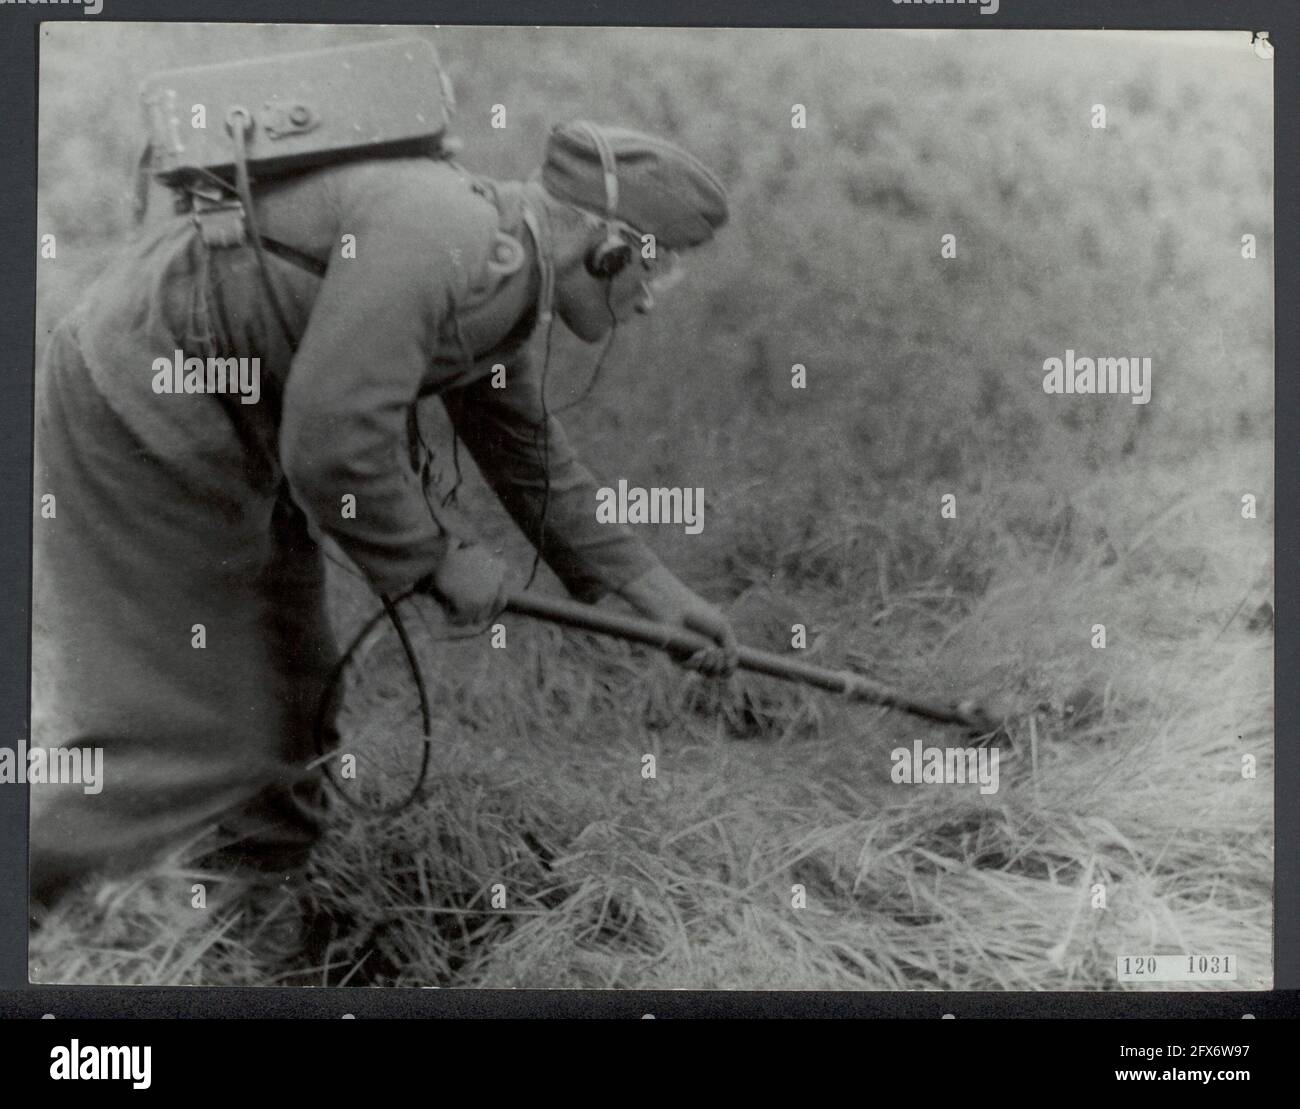 Clearing landmines near Hoek van Holland. A German prisoner of war searches the area with an electric mine detector. Before him the area has been searched with metal rods. Following him are the prisoners of war who must walk arm in arm across the field, August 1945, prisoners of war, landmines, second world war, reconstruction, The Netherlands, 20th century press agency photo, news to remember, documentary, historic photography 1945-1990, visual stories, human history of the Twentieth Century, capturing moments in time Stock Photo